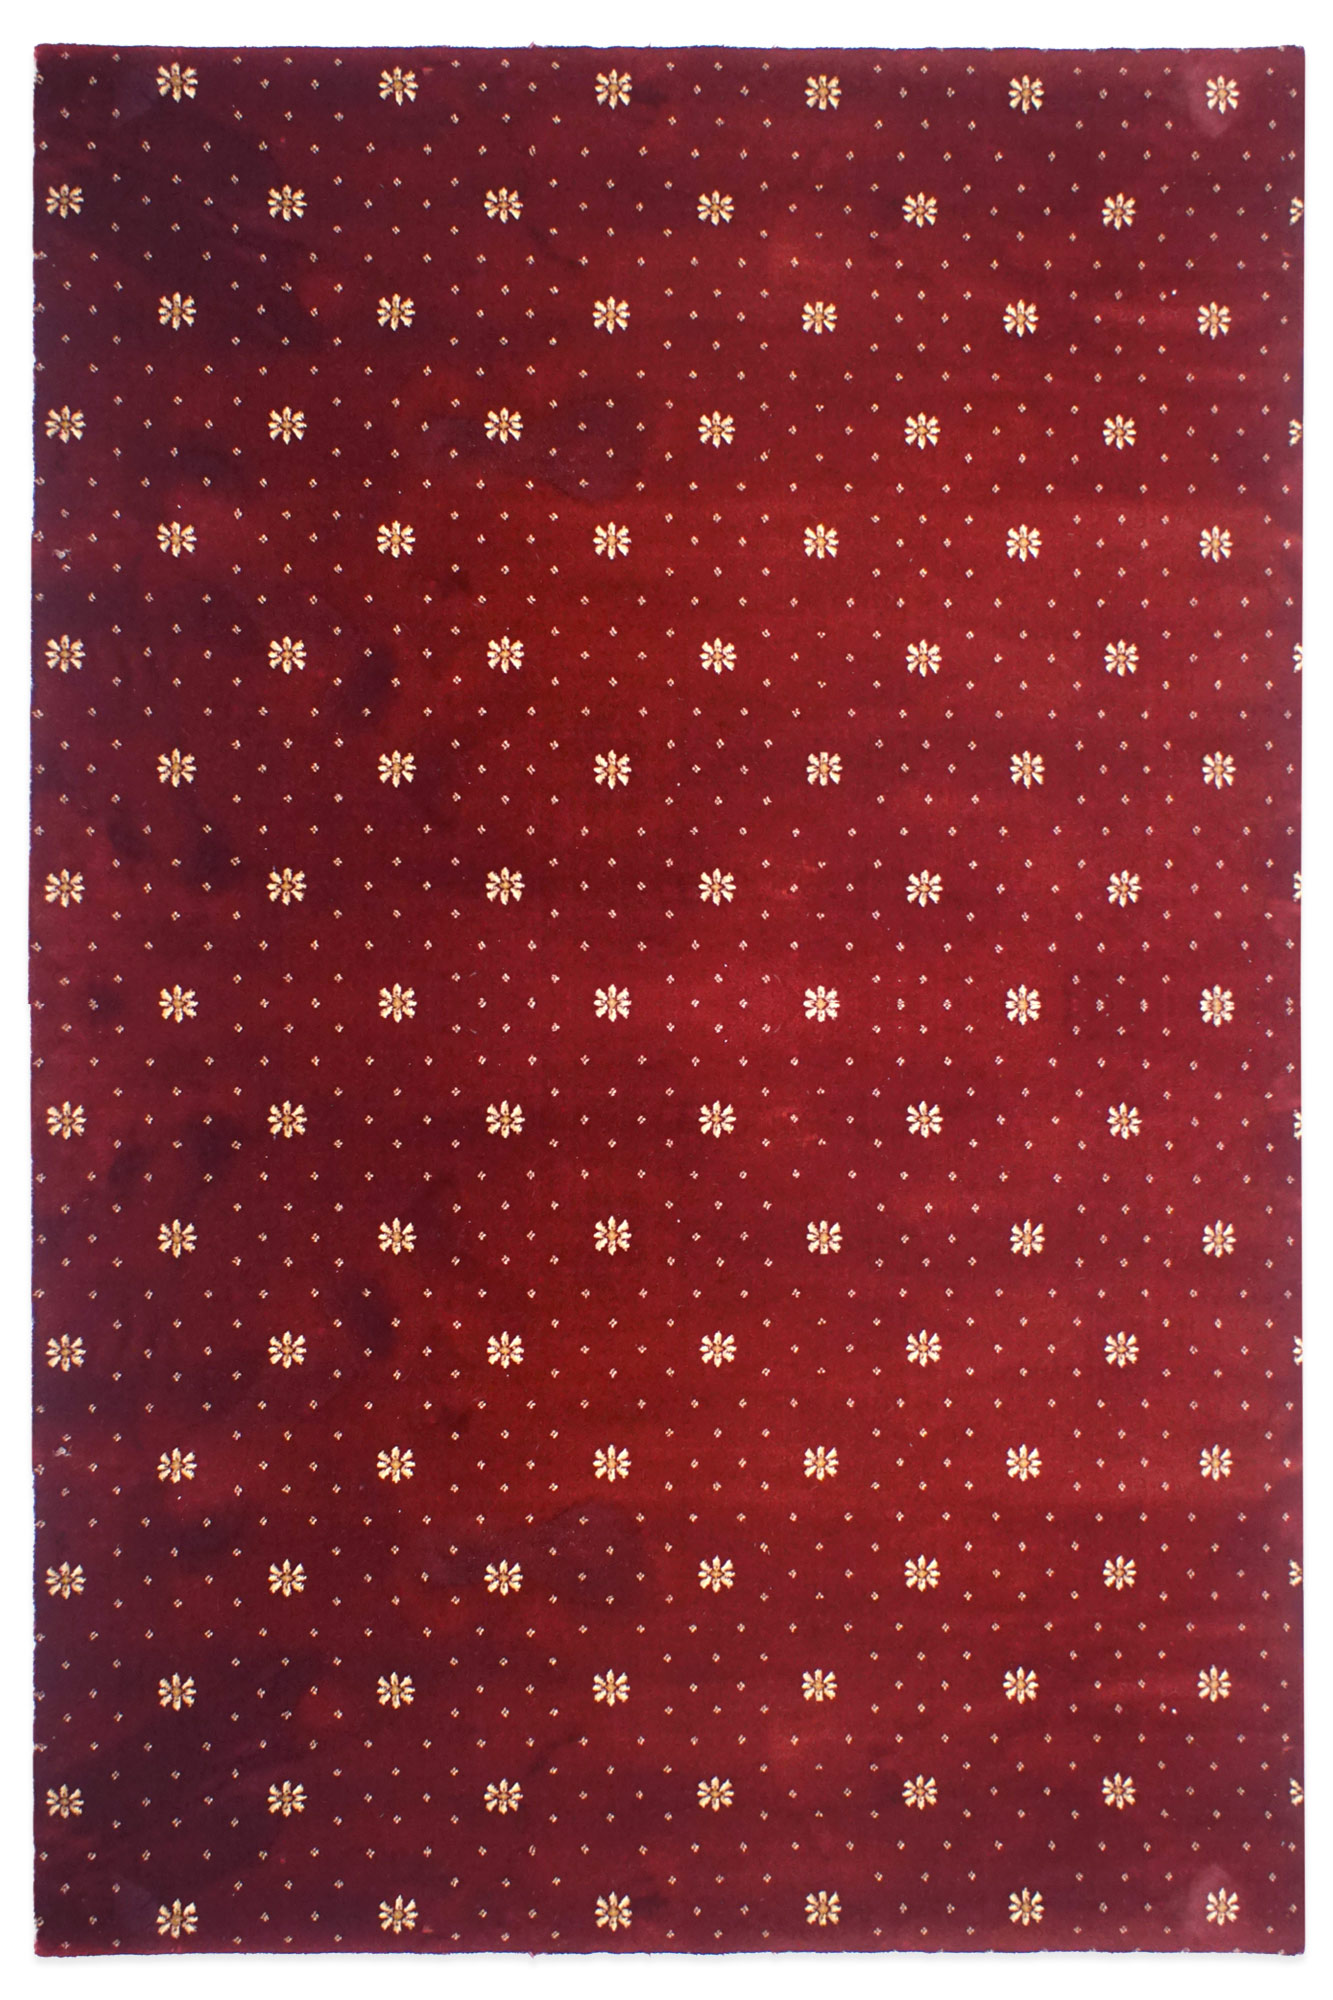 LAHORE-RED-153x204-plake